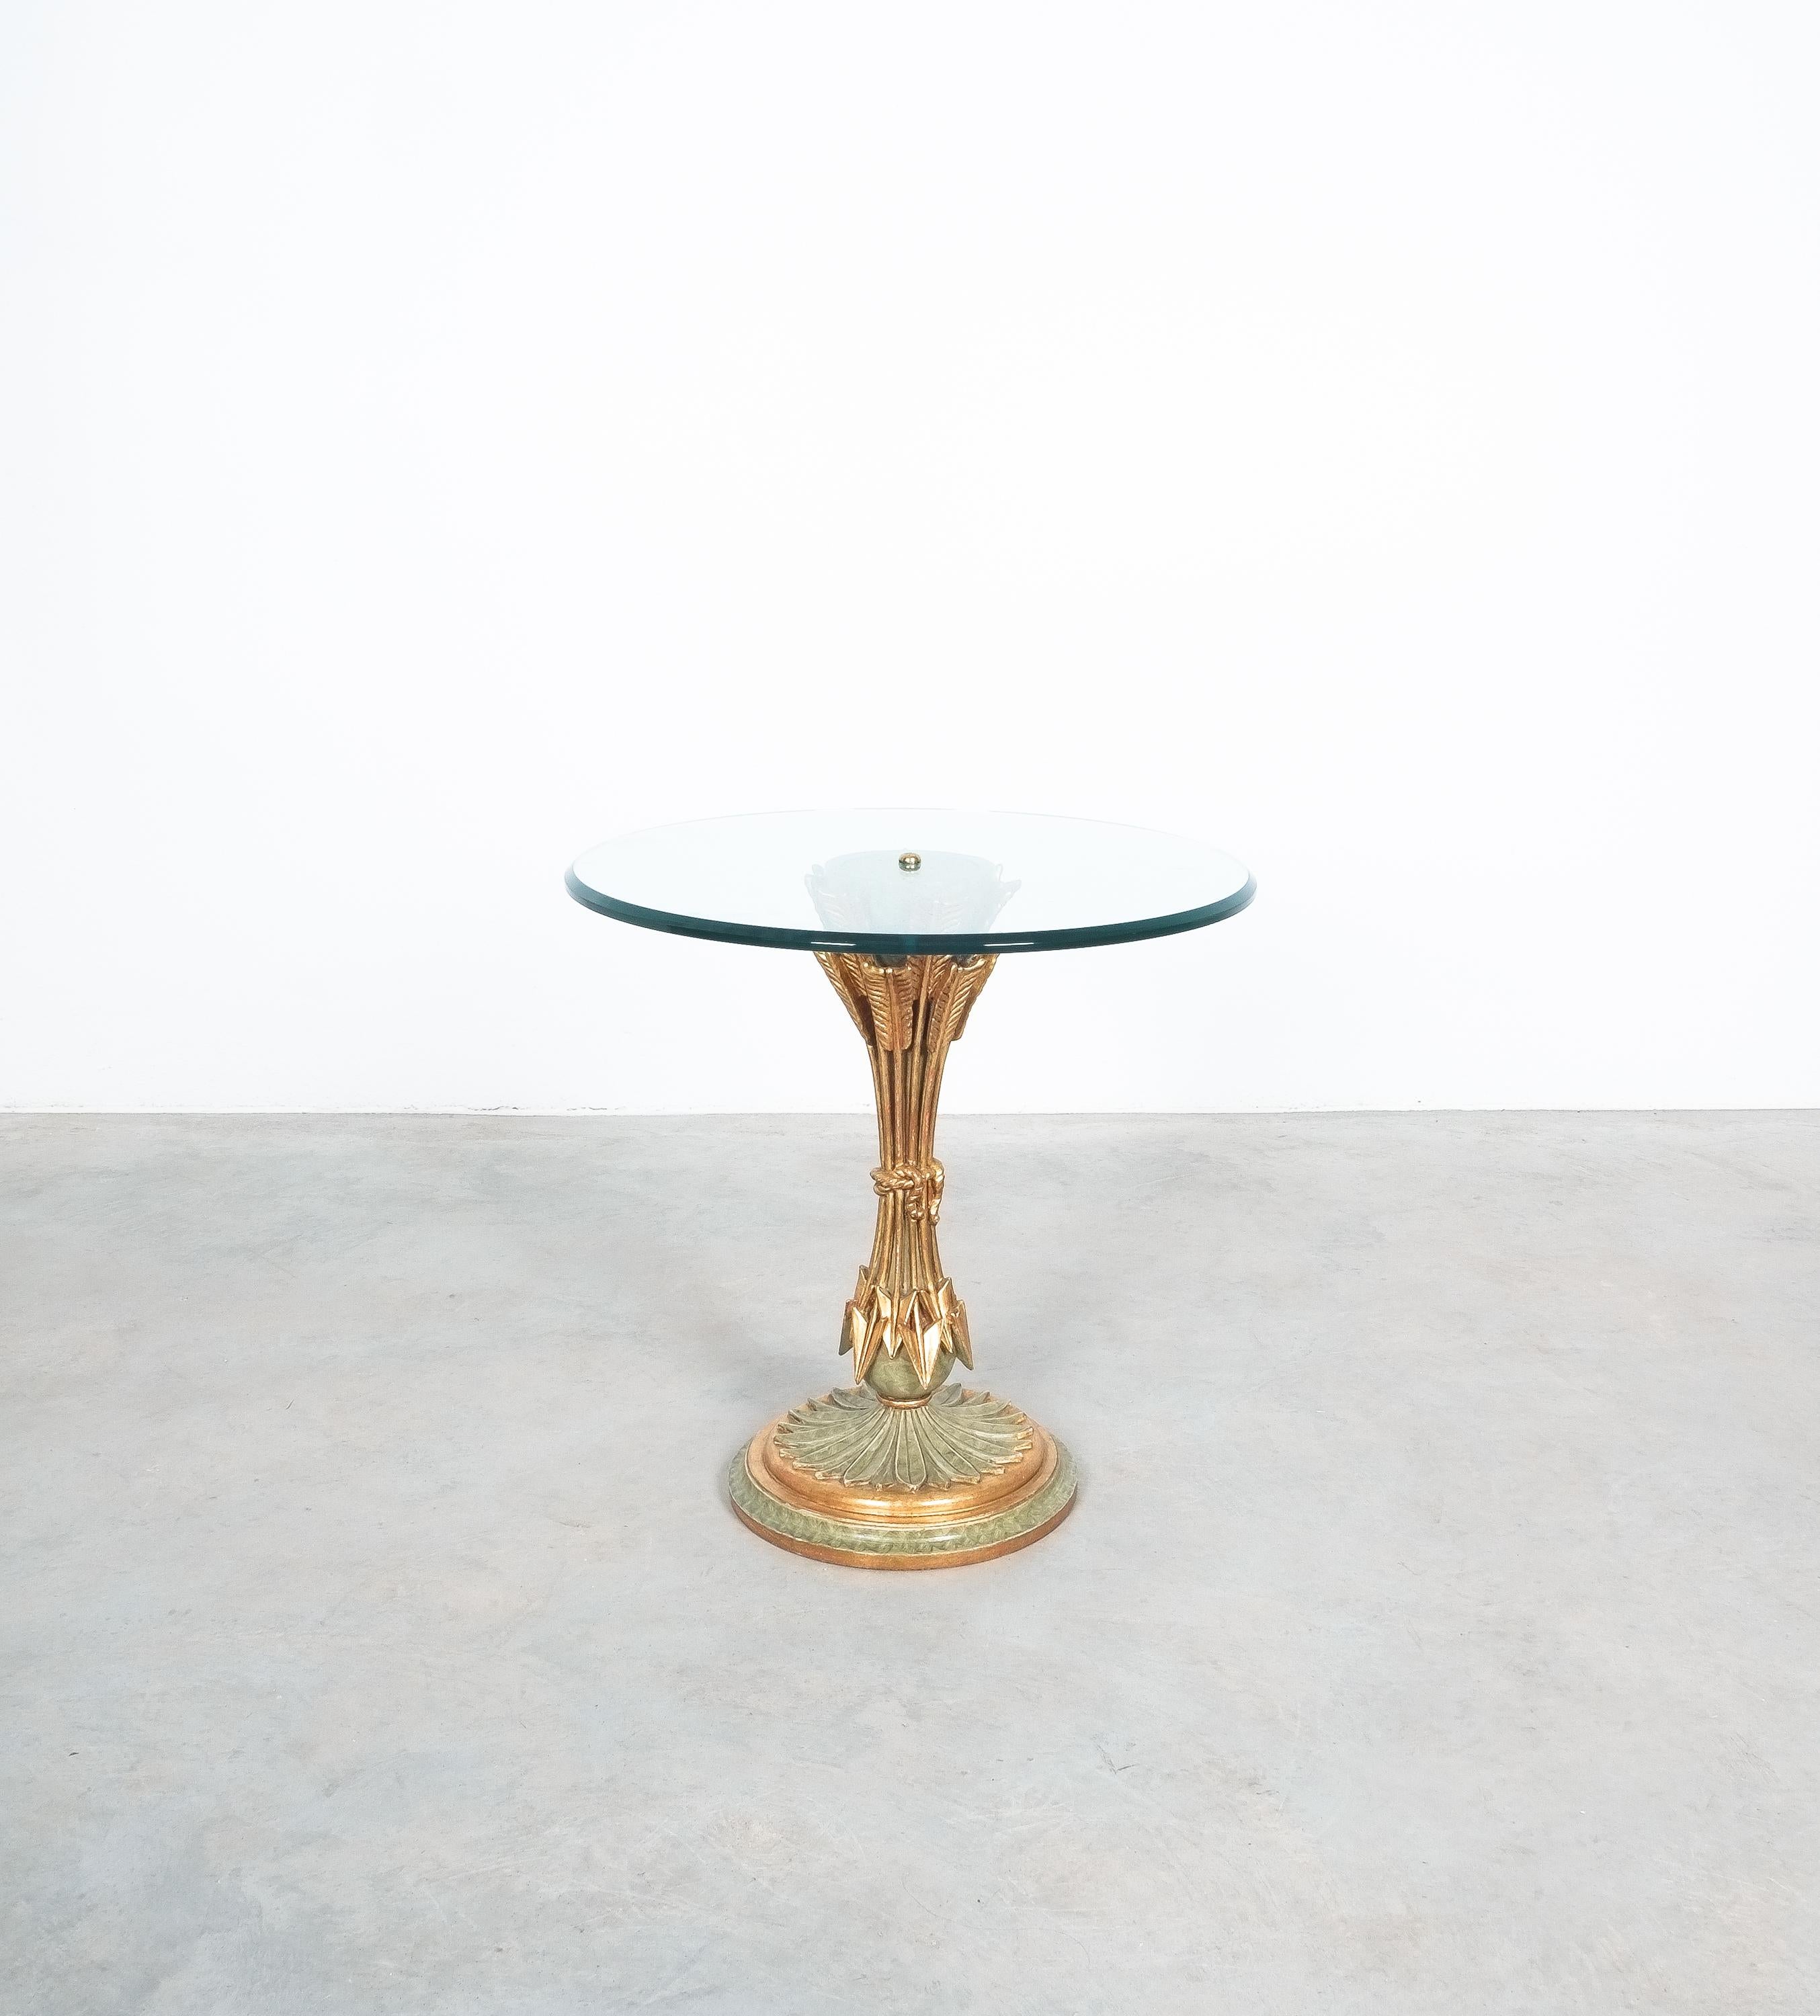 Nice gilt wooden side table, France, circa 1970

Well preserved and sized small center or side table in very good condition. The wooden base shows some bundled arrows pointing downwards. The thick center glass table top is in very good condition